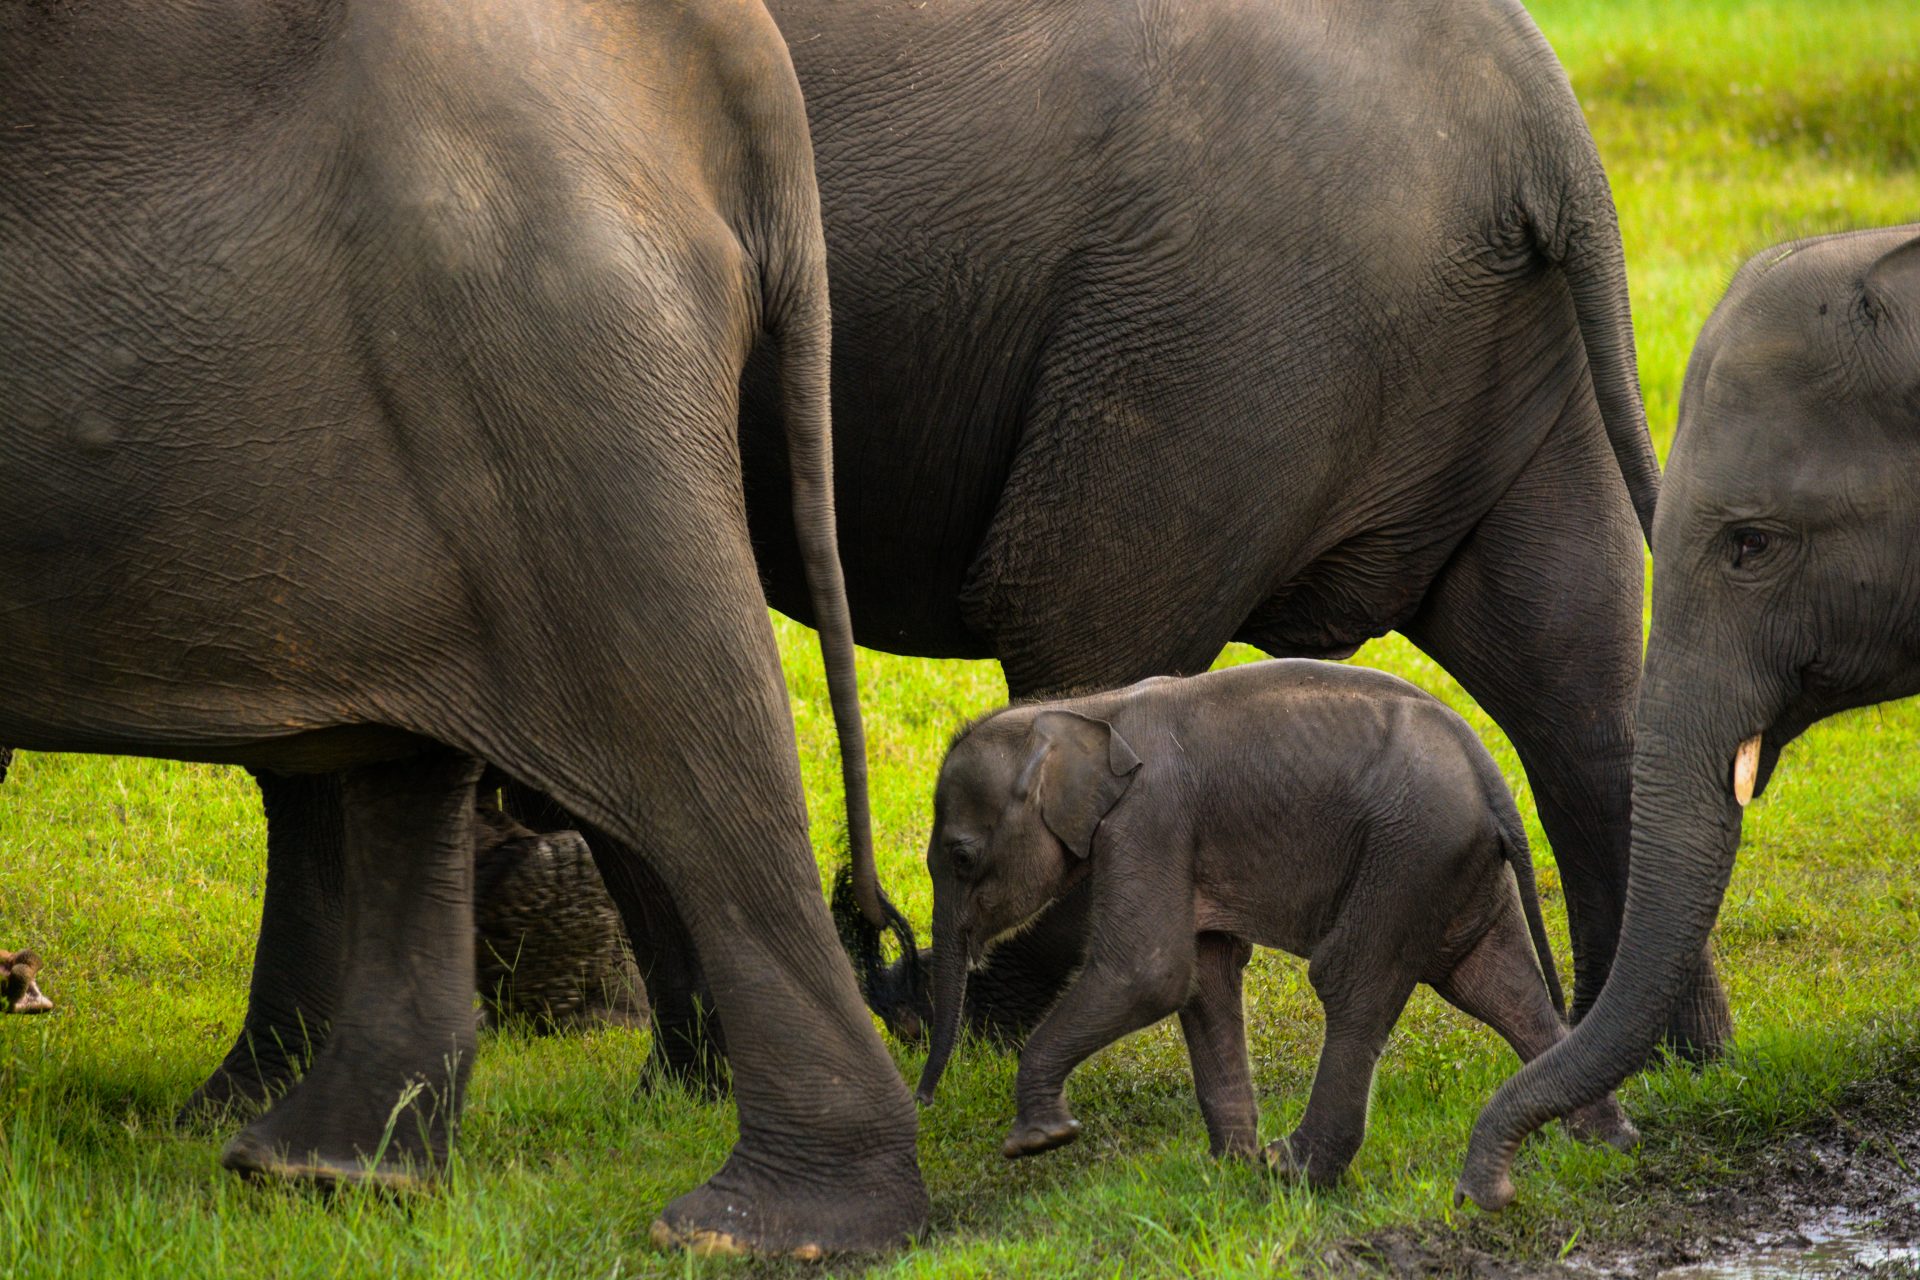 A new study found that elephants have names